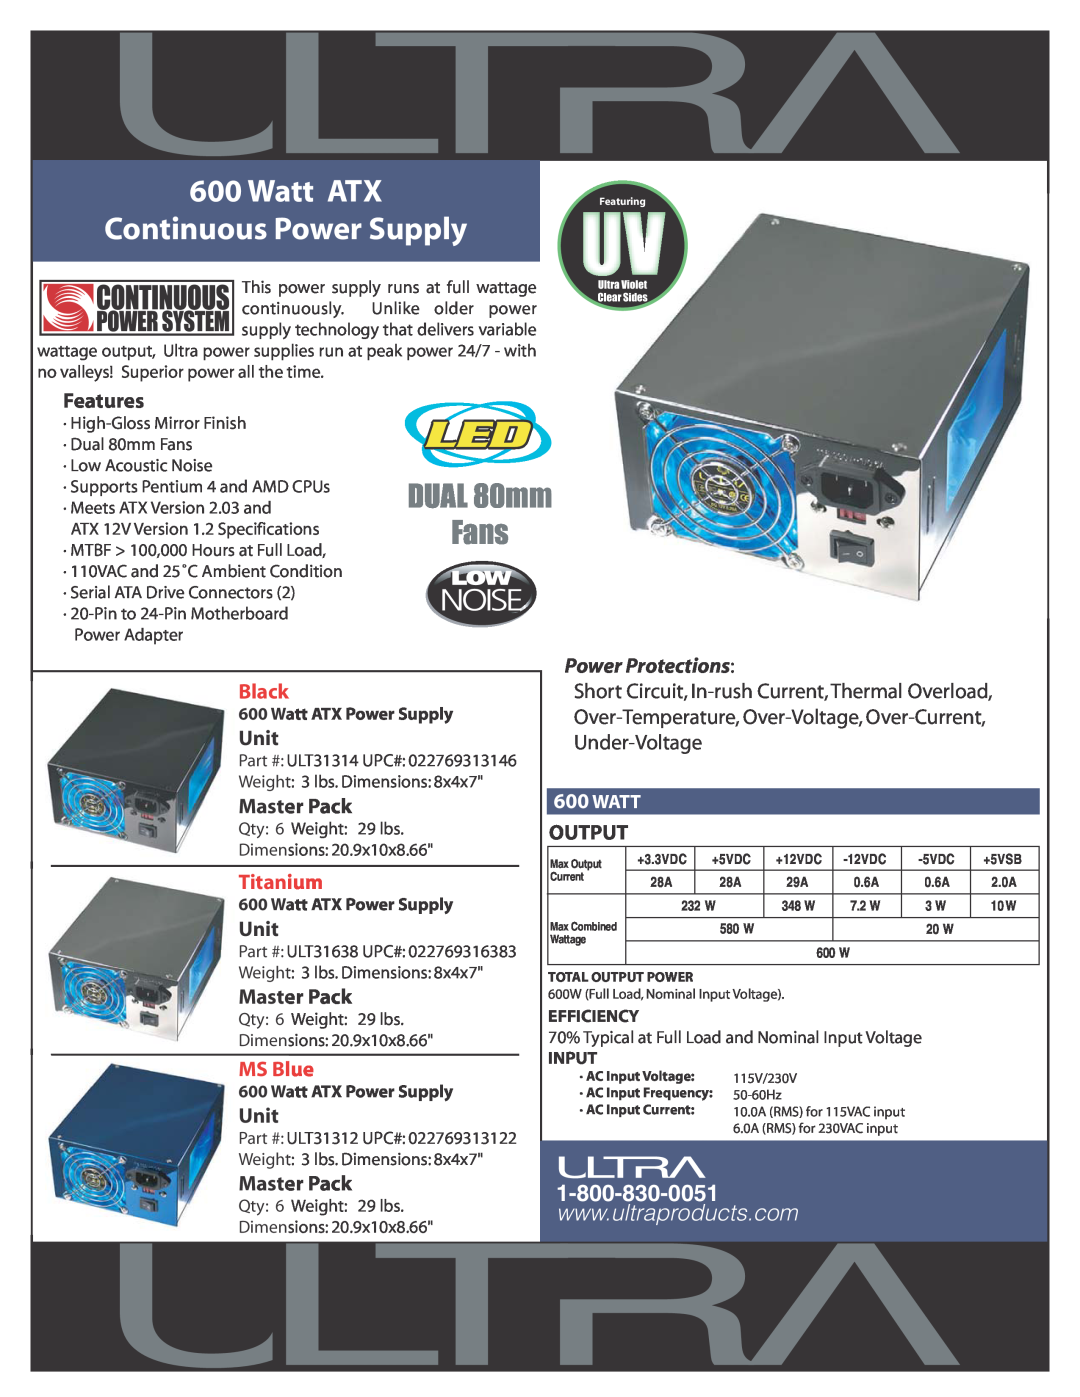 Ultra Products ULT31312 dimensions Watt ATX Continuous Power Supply, DUAL 80mm, Fans, Features, Black, Unit, Master Pack 